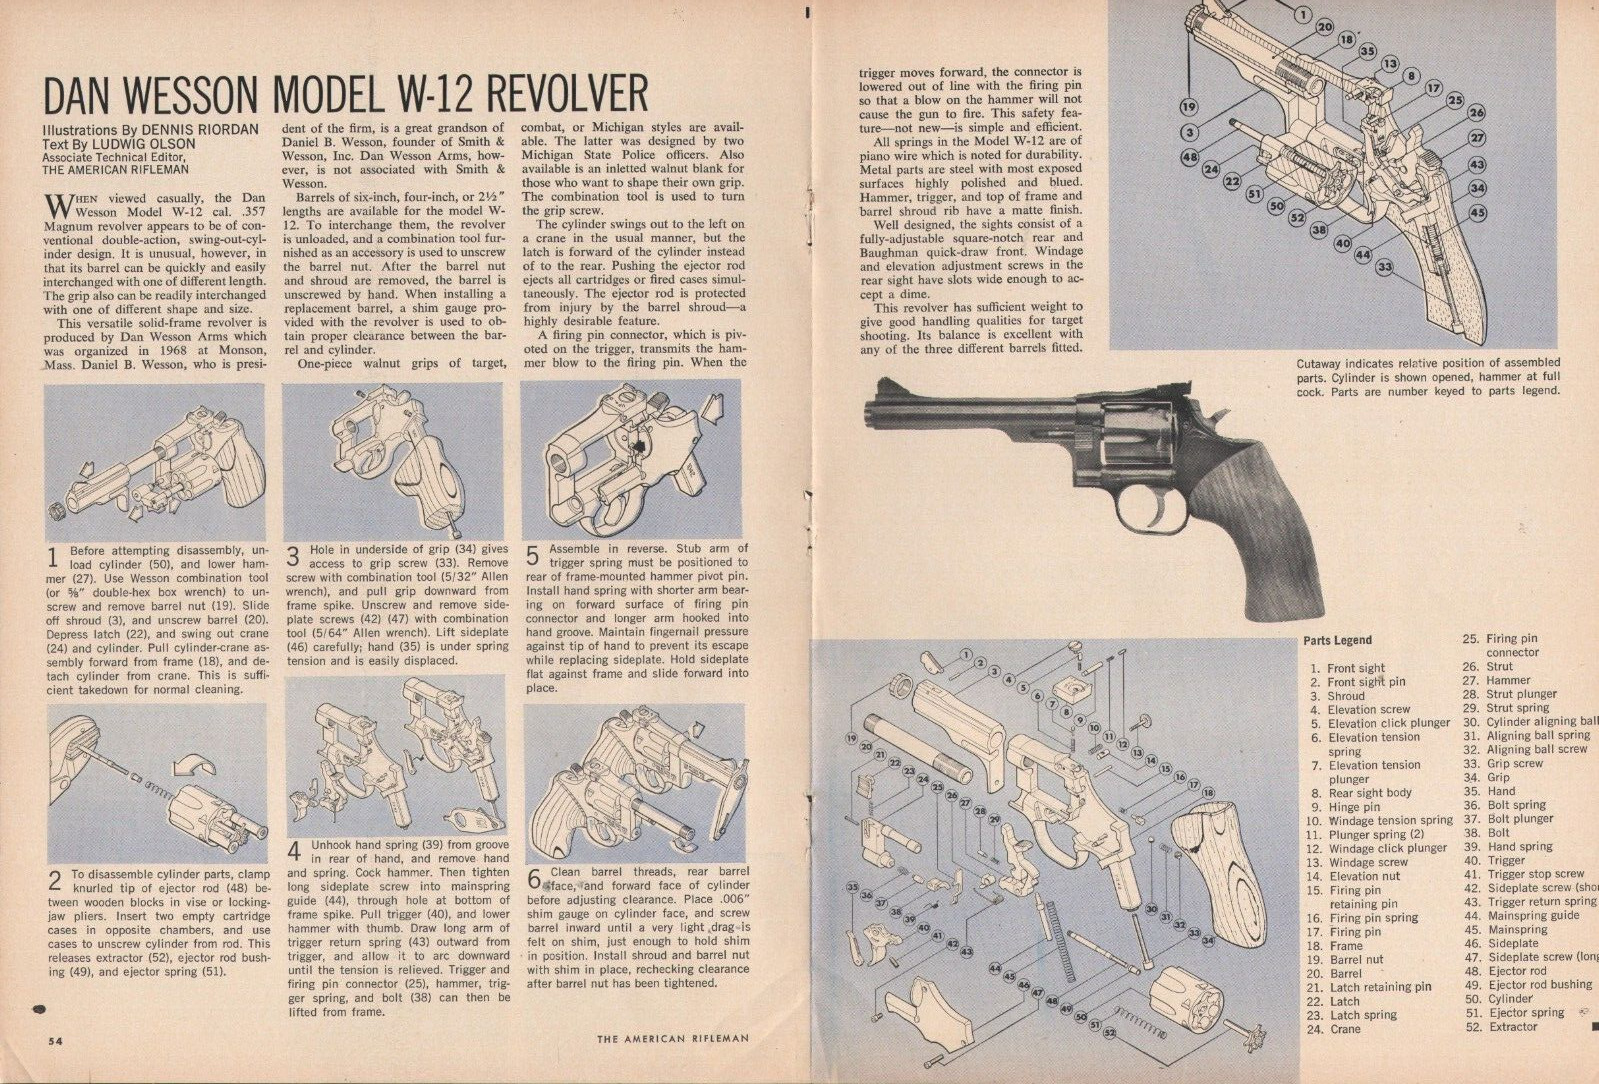 1972 2pg Print Article of Dan Wesson W-12 Revolver Parts List & Disassembly